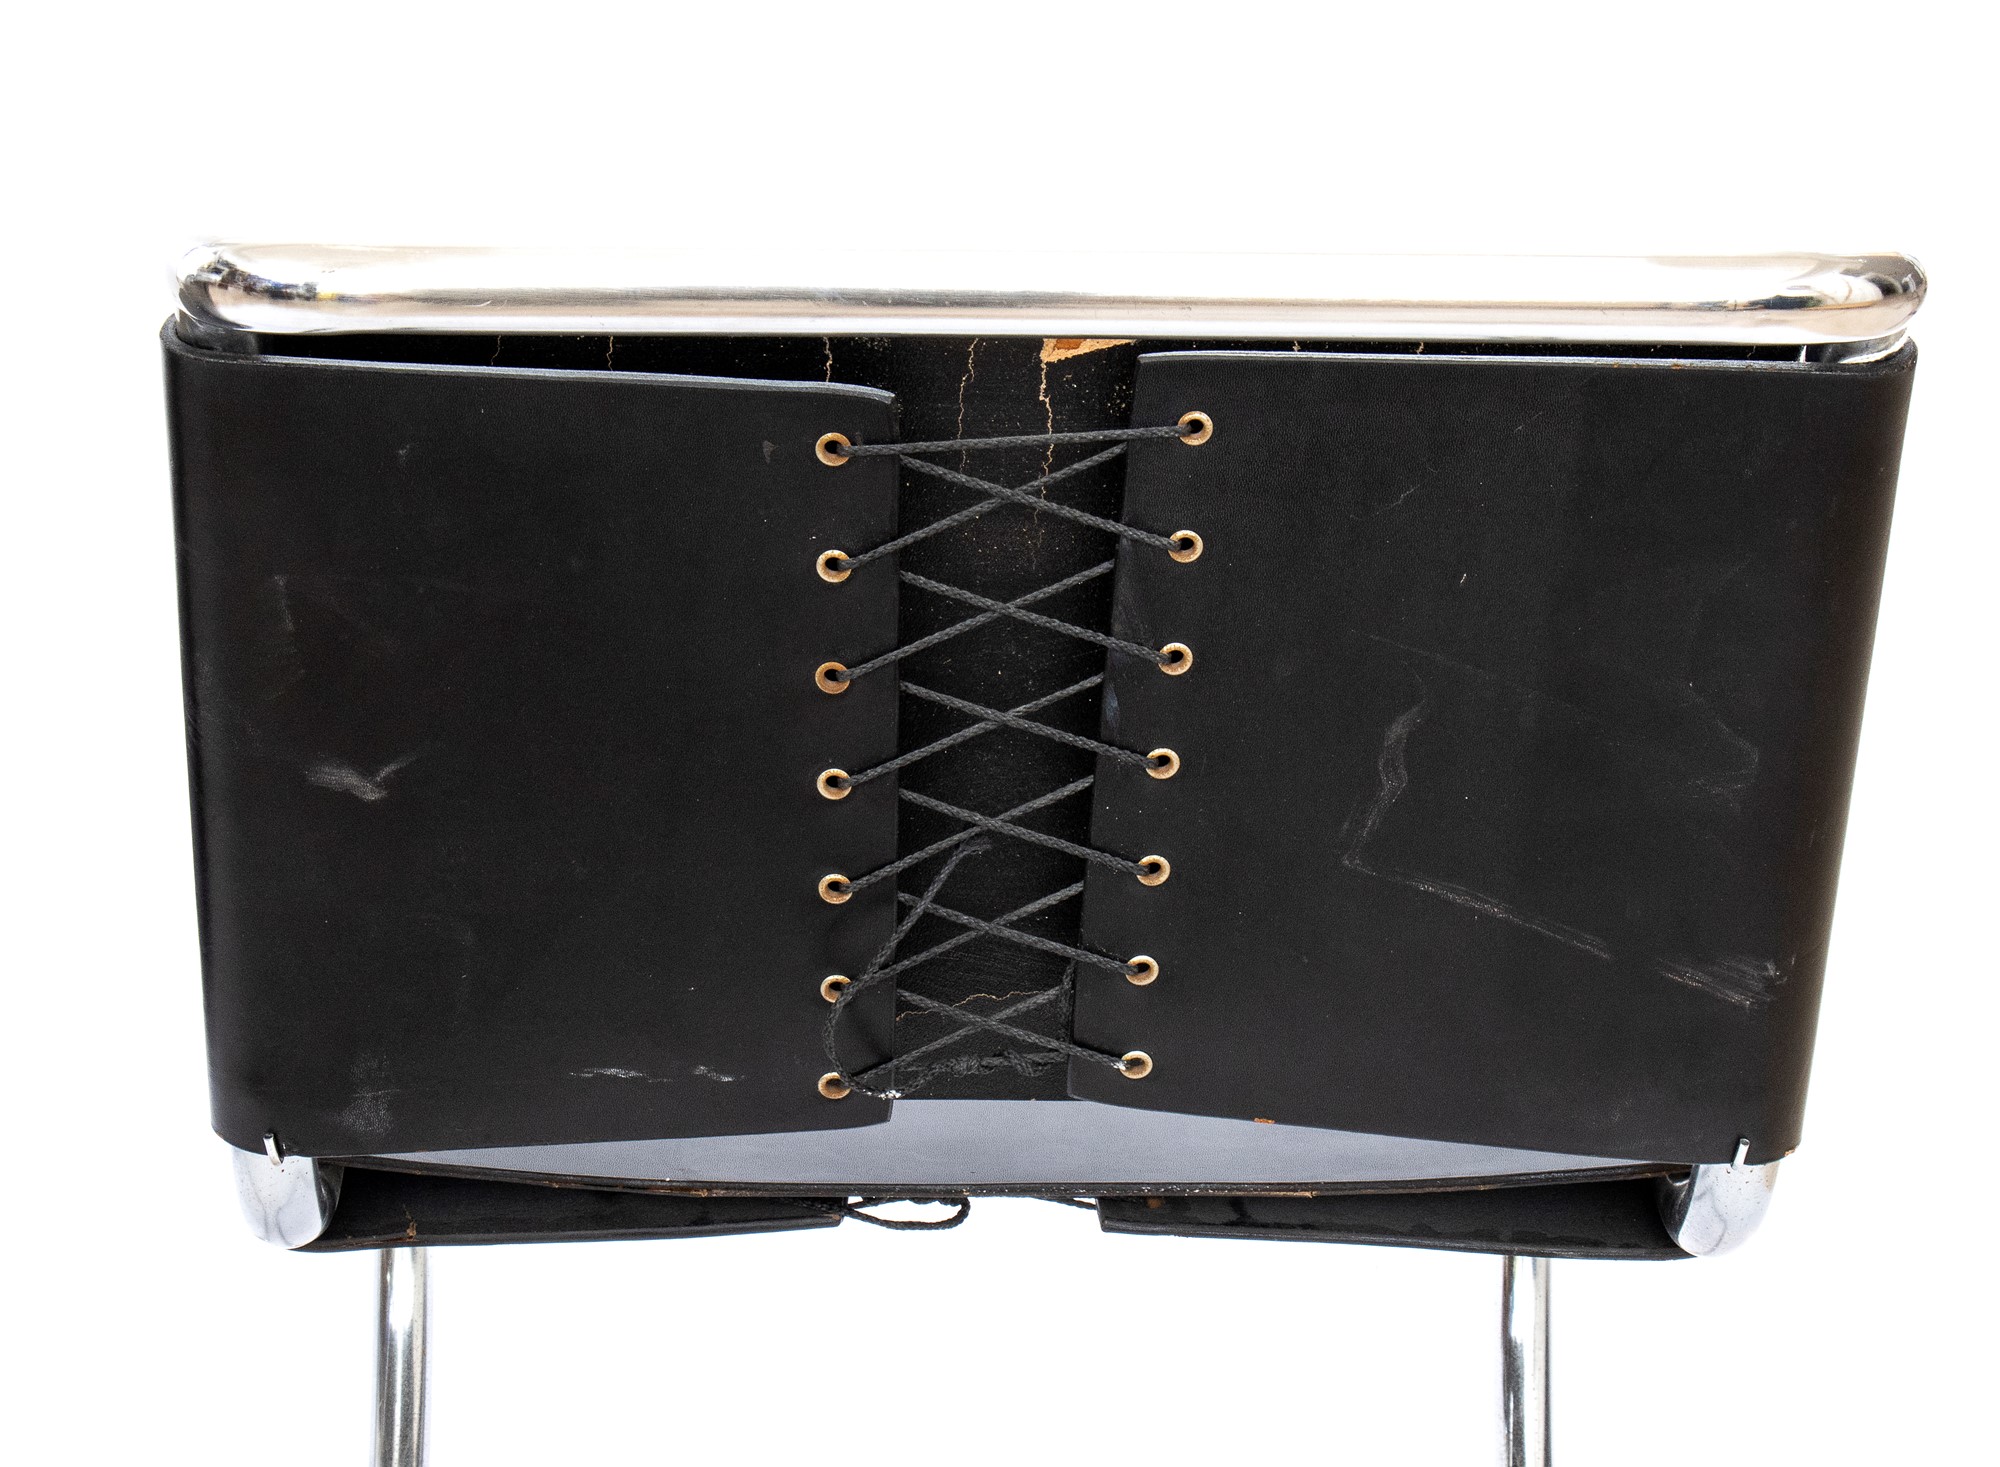 2 chairs in black leather and steel designed by Mart Stam and Marcer Beuer - Image 17 of 19